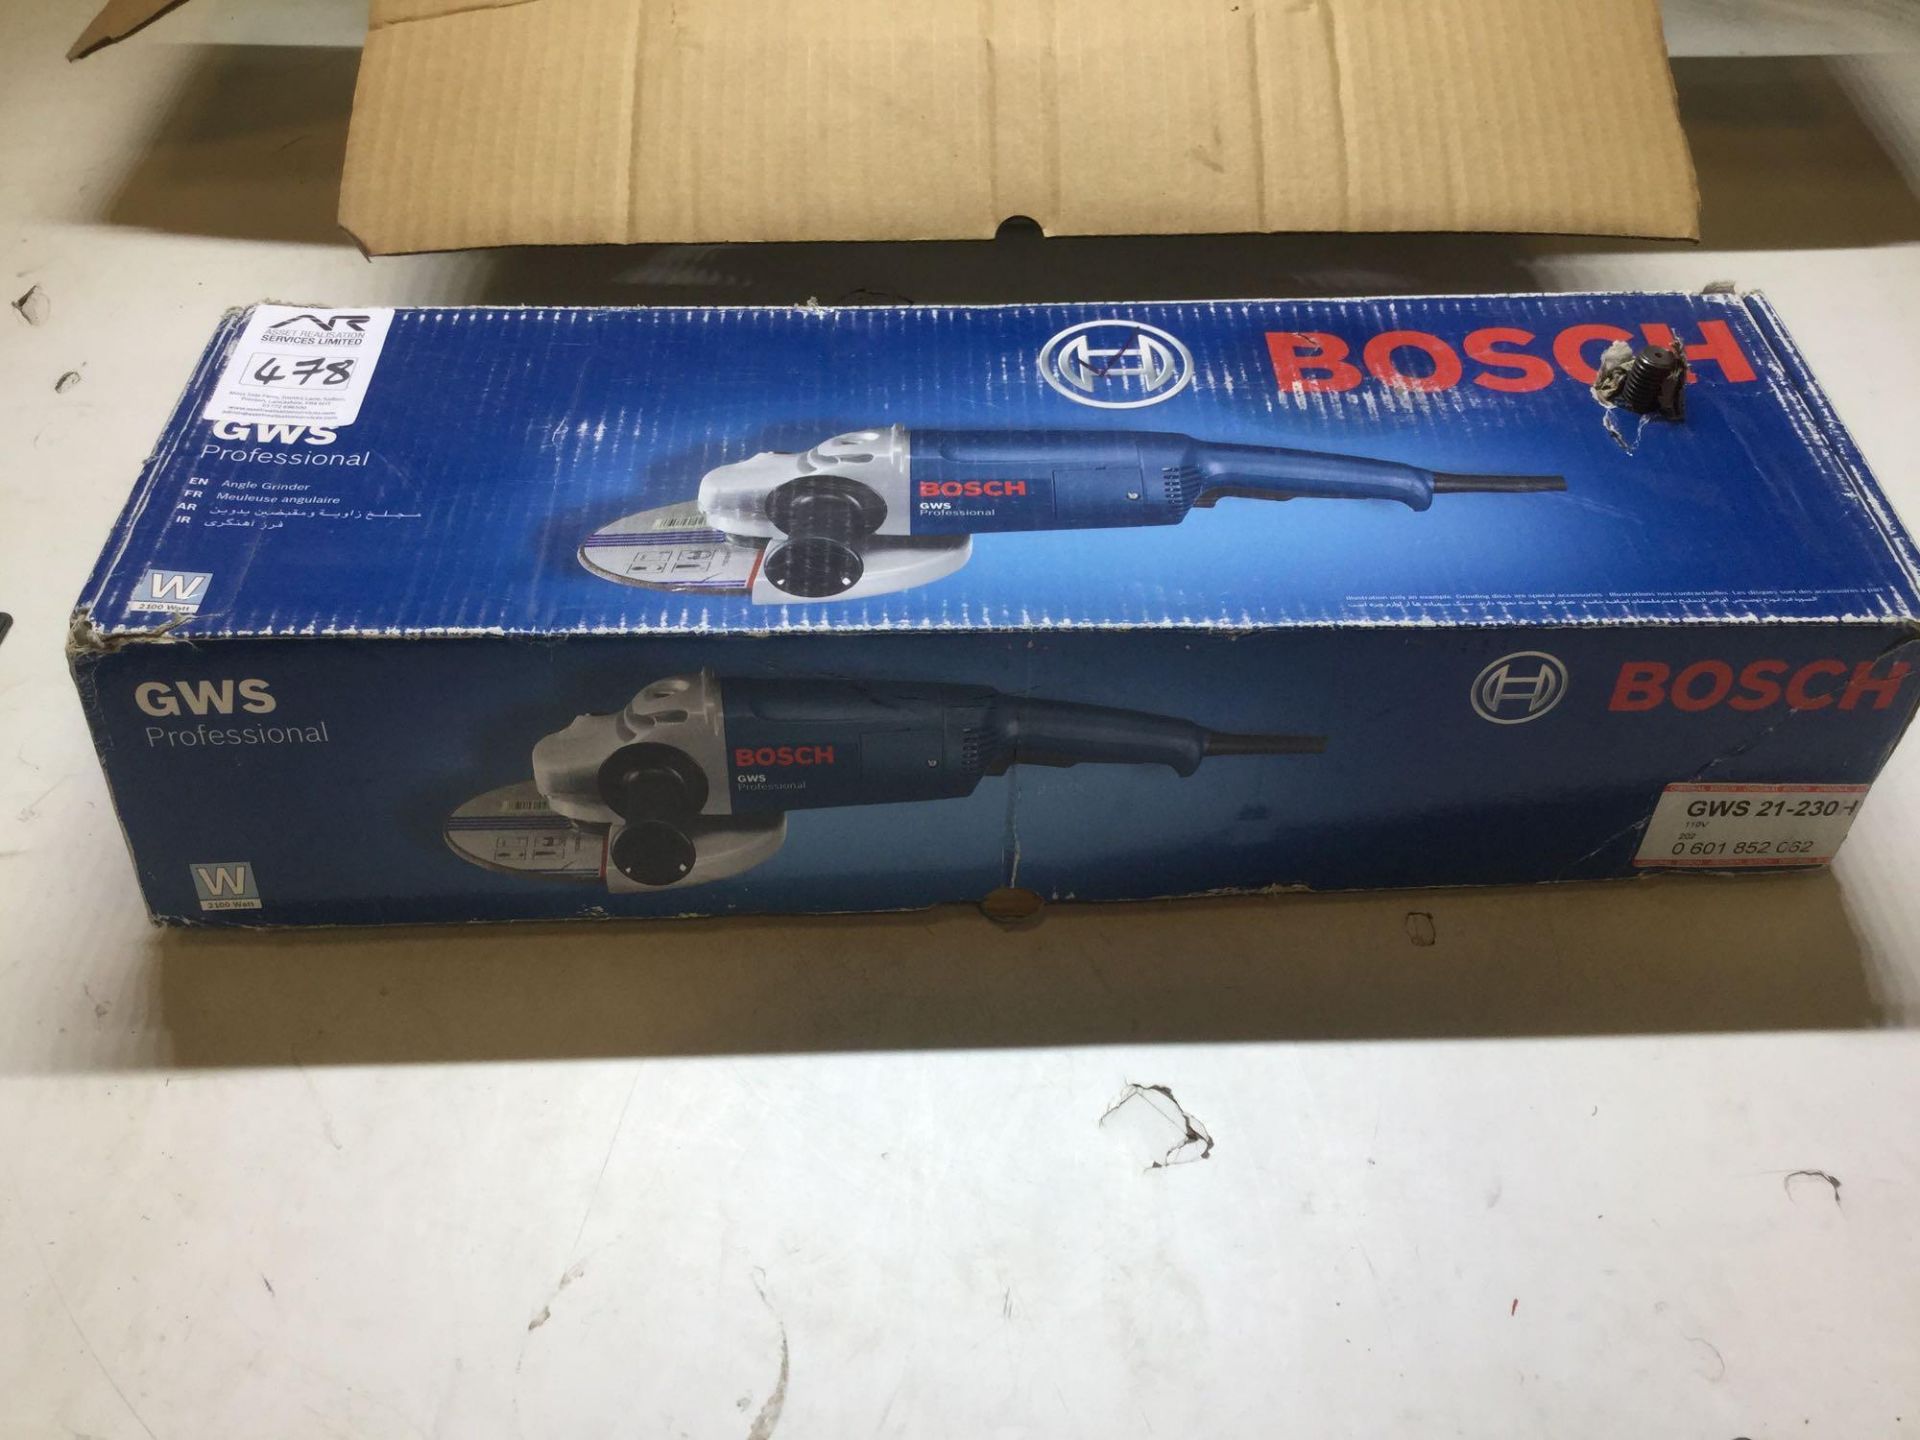 Bosch GWS 21 230 H 9 inch Angle Grinder 110v (New In Box) - Image 5 of 6